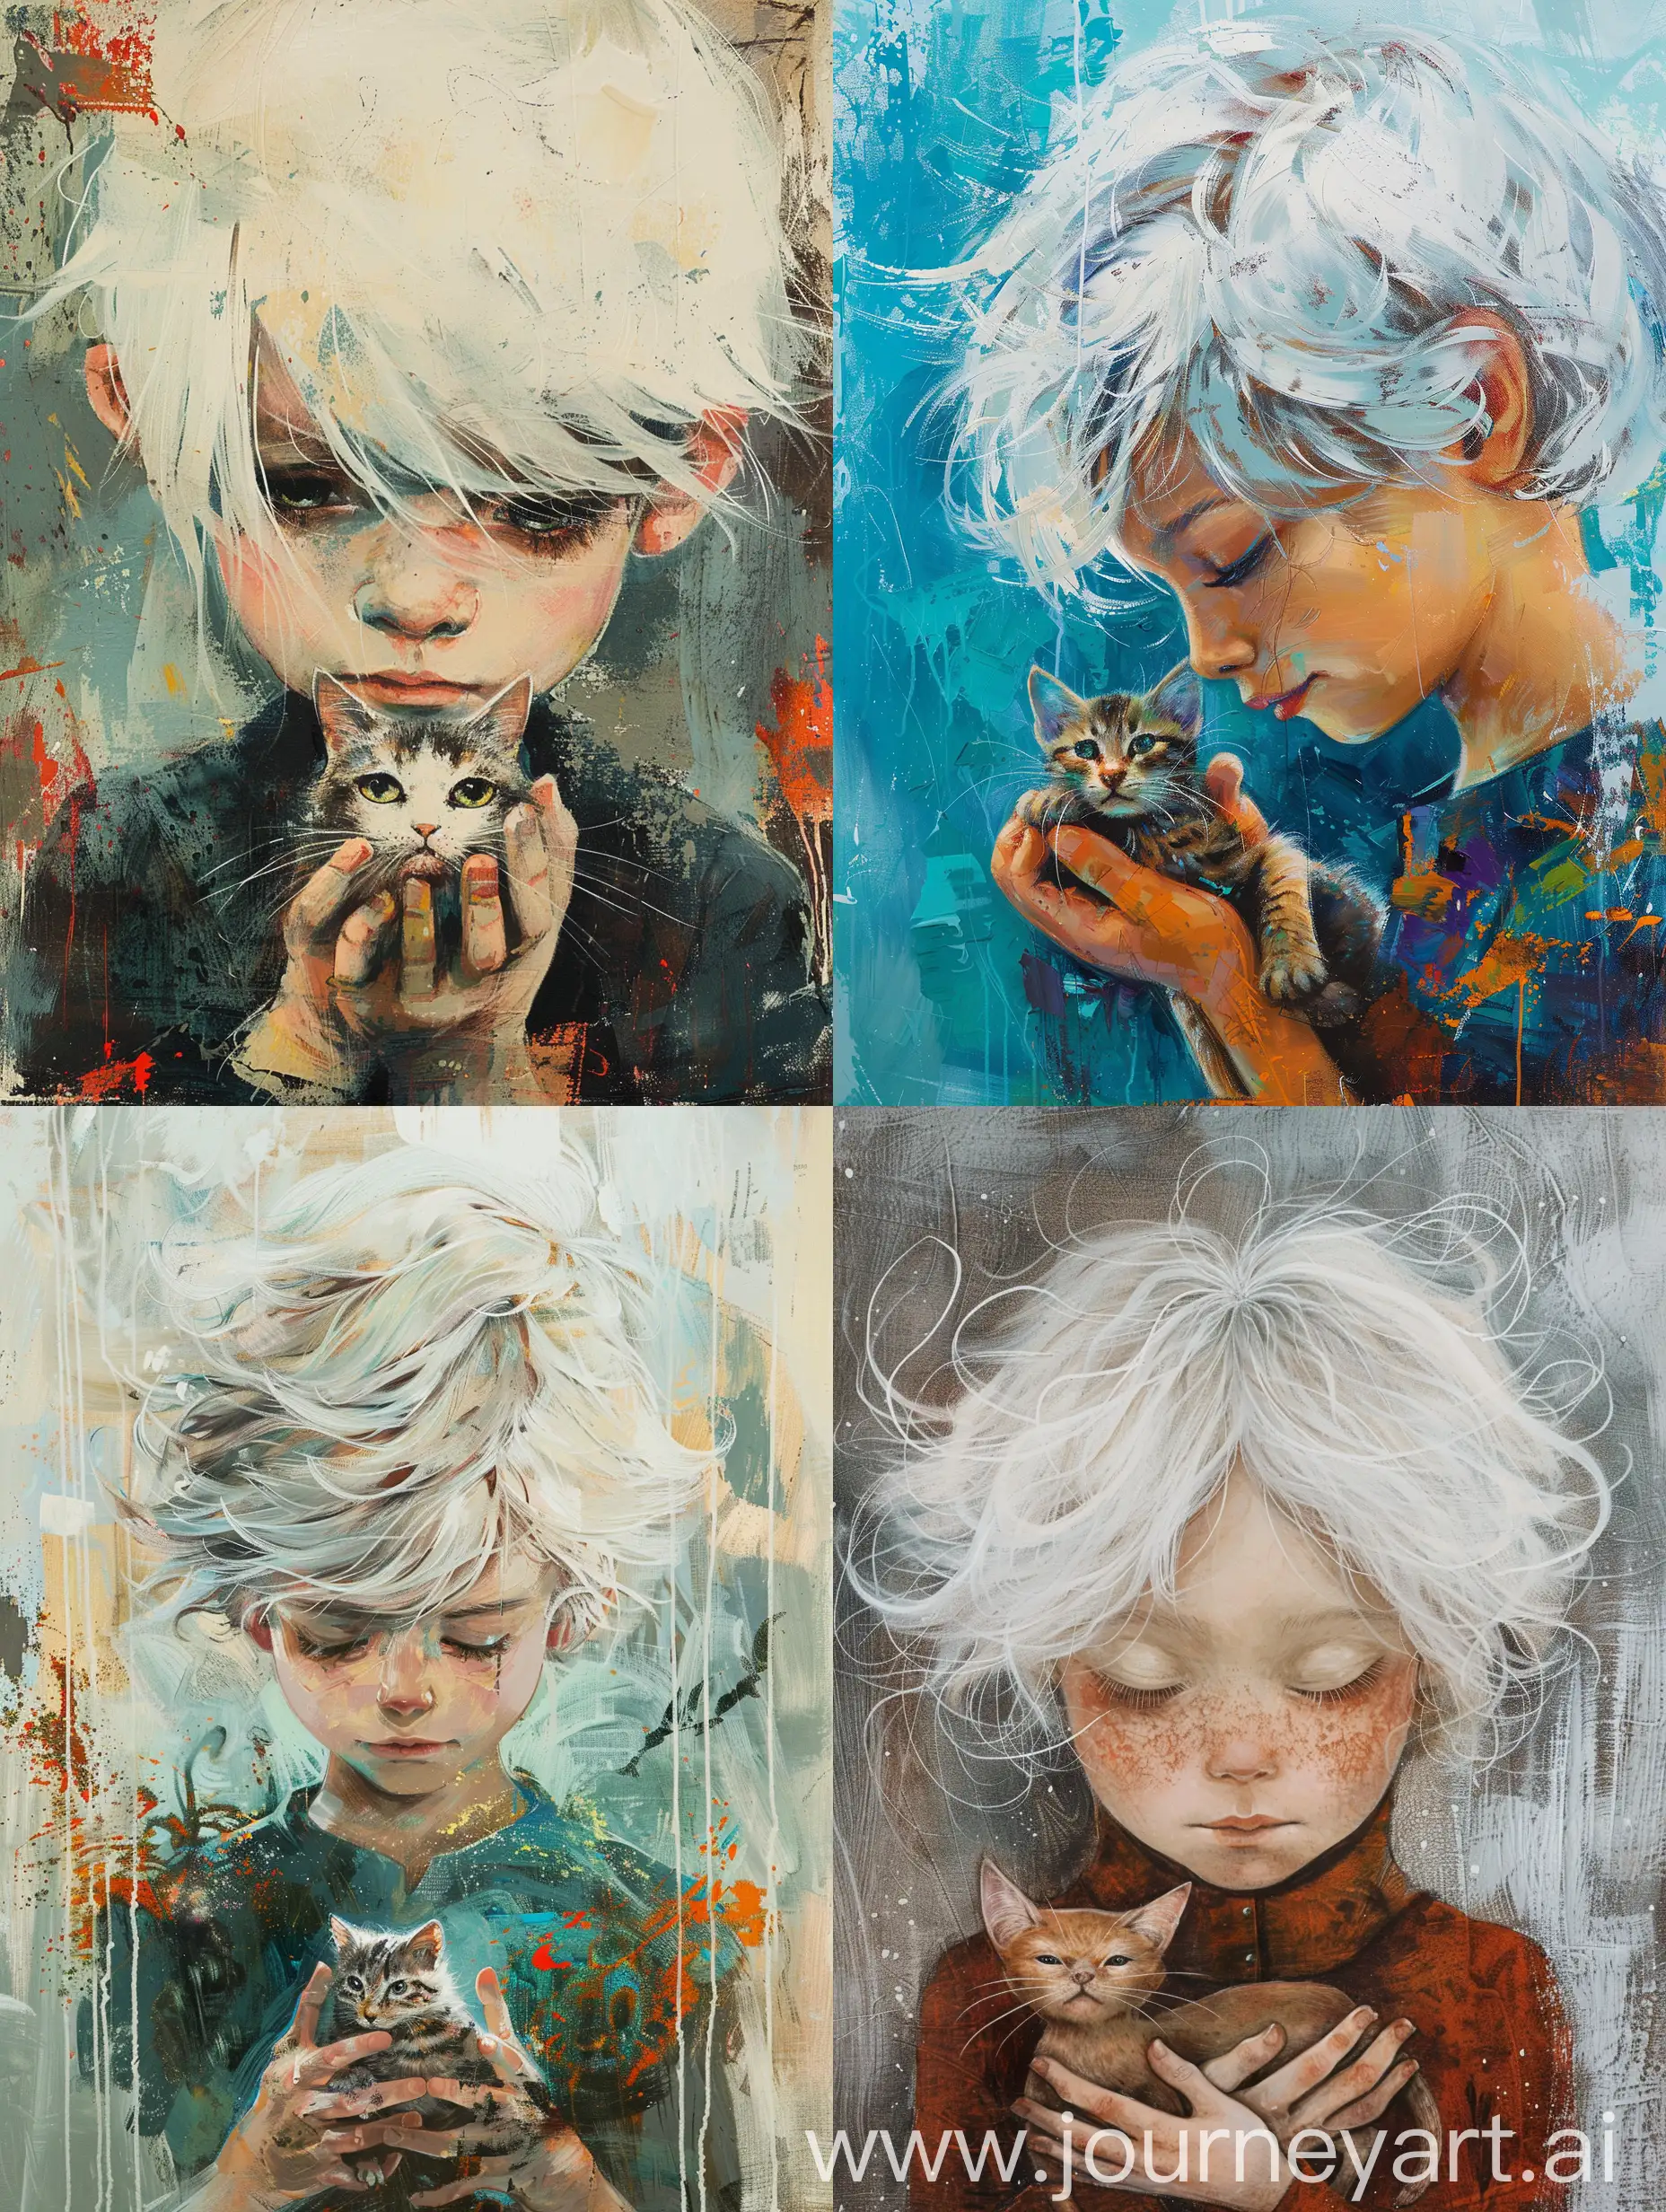 Boy with white hair with a cat in her hands in the style of abstract art 